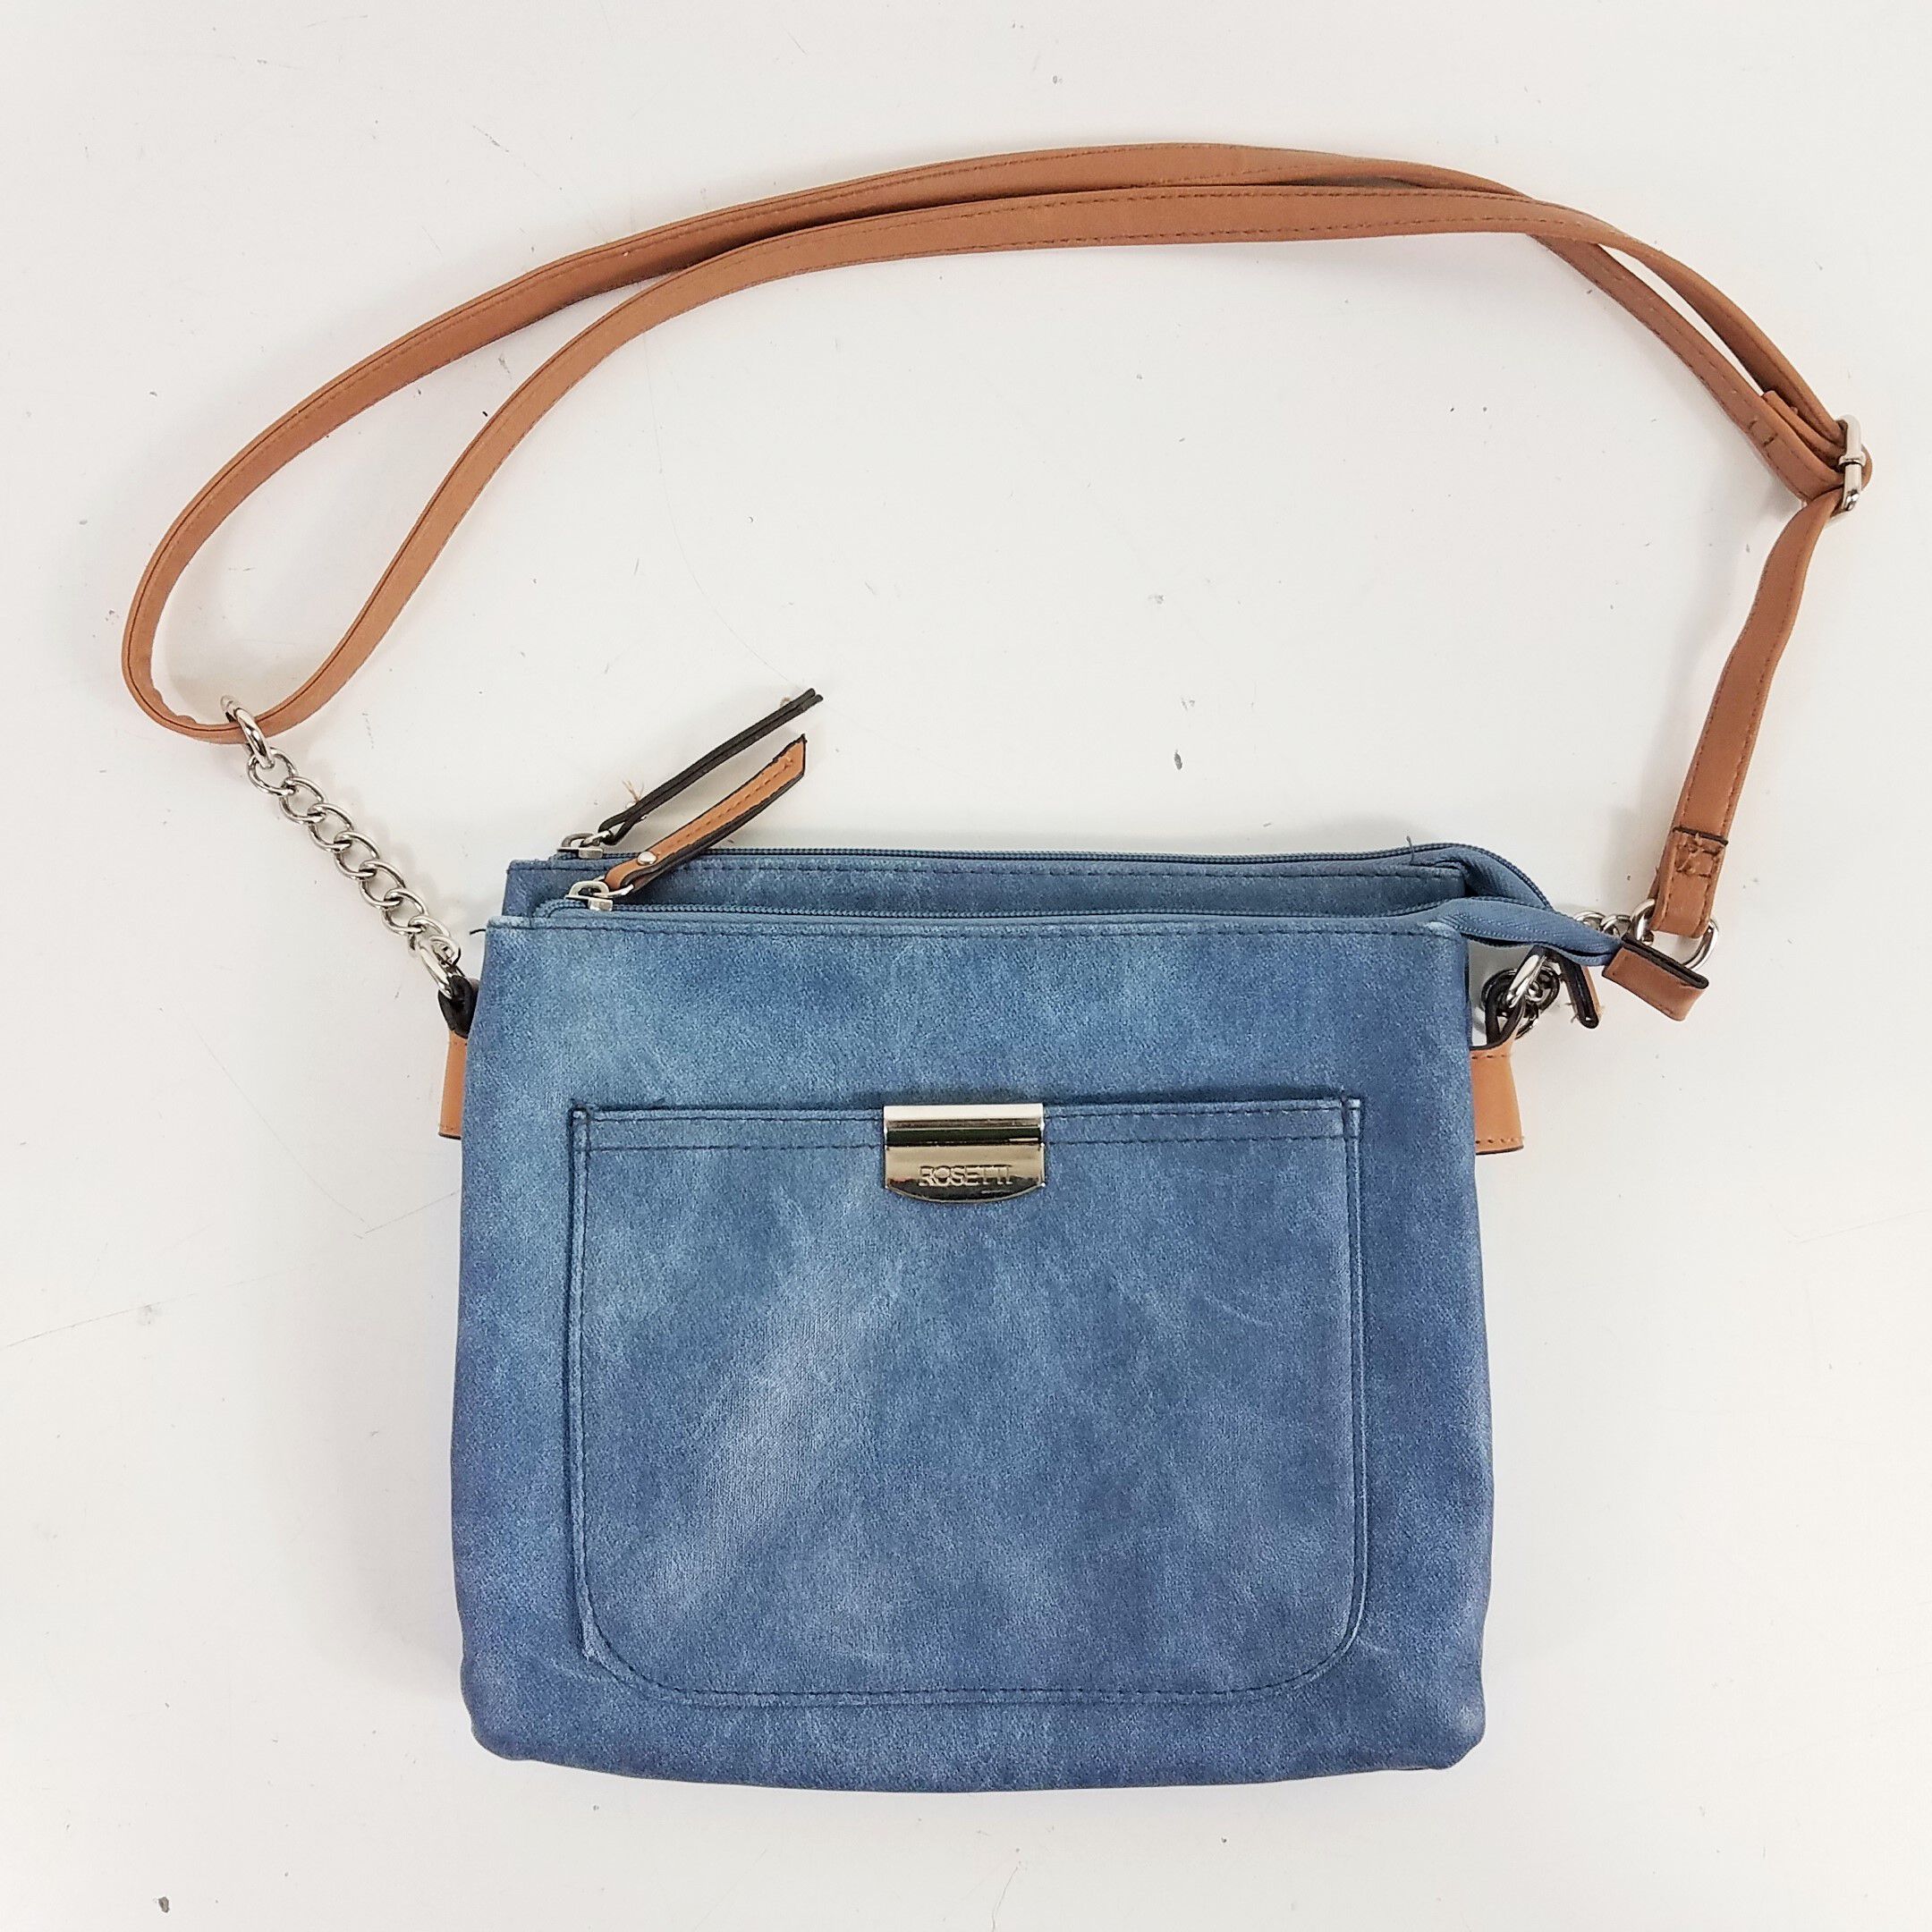 Rosetti - A color for every outfit! The Cassie tote comes in Black,  Tortoise shell, and Grey green. #rosetti #handbag #handbags #crossbody  #colors #colorways #woven #details #options #purse | Facebook